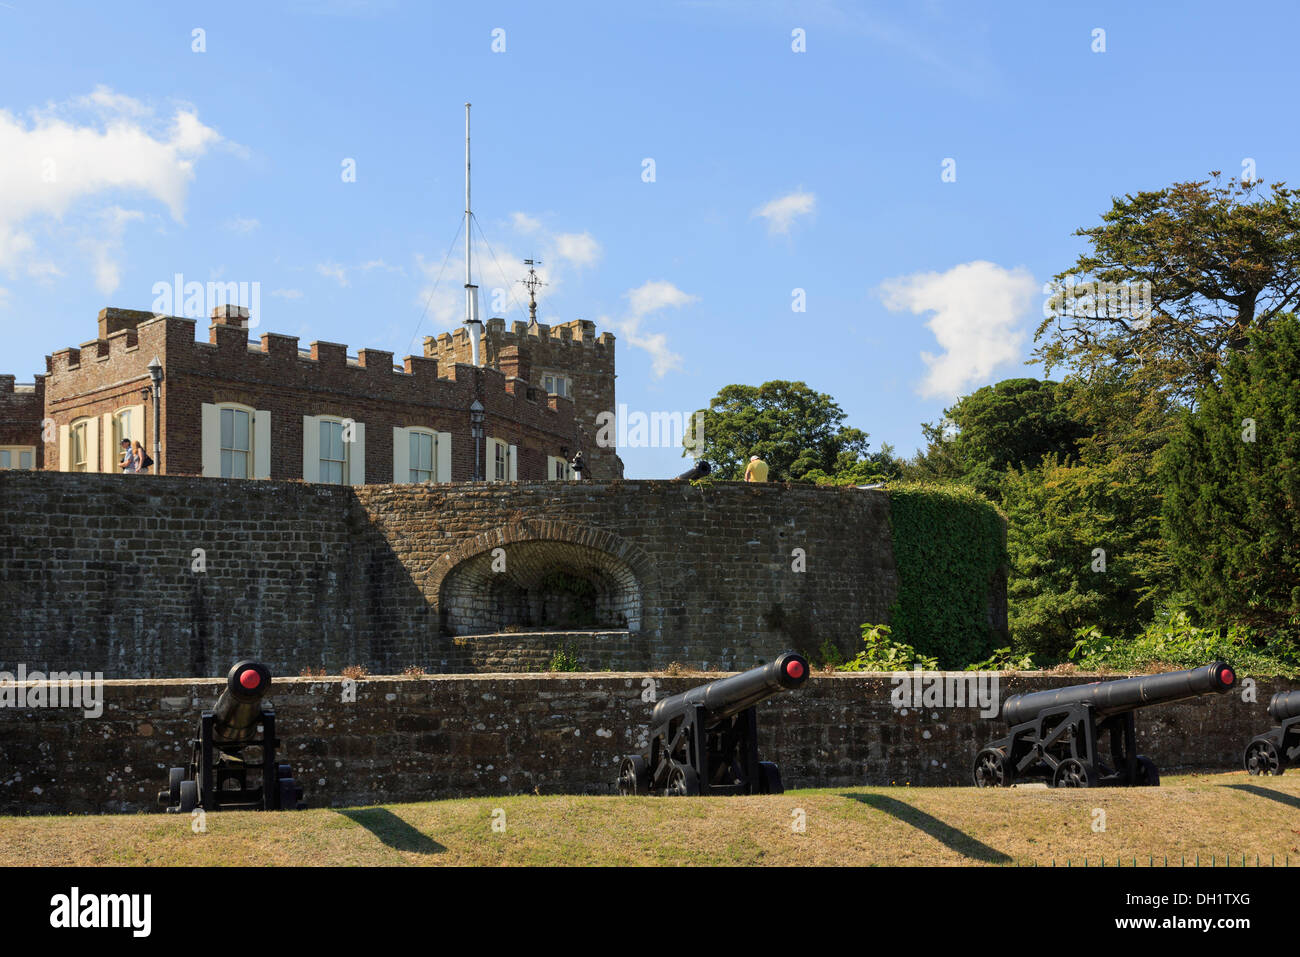 Henry VIII's 16th century Walmer Castle with cannons outside walls near Deal, Kent, England, UK, Britain Stock Photo